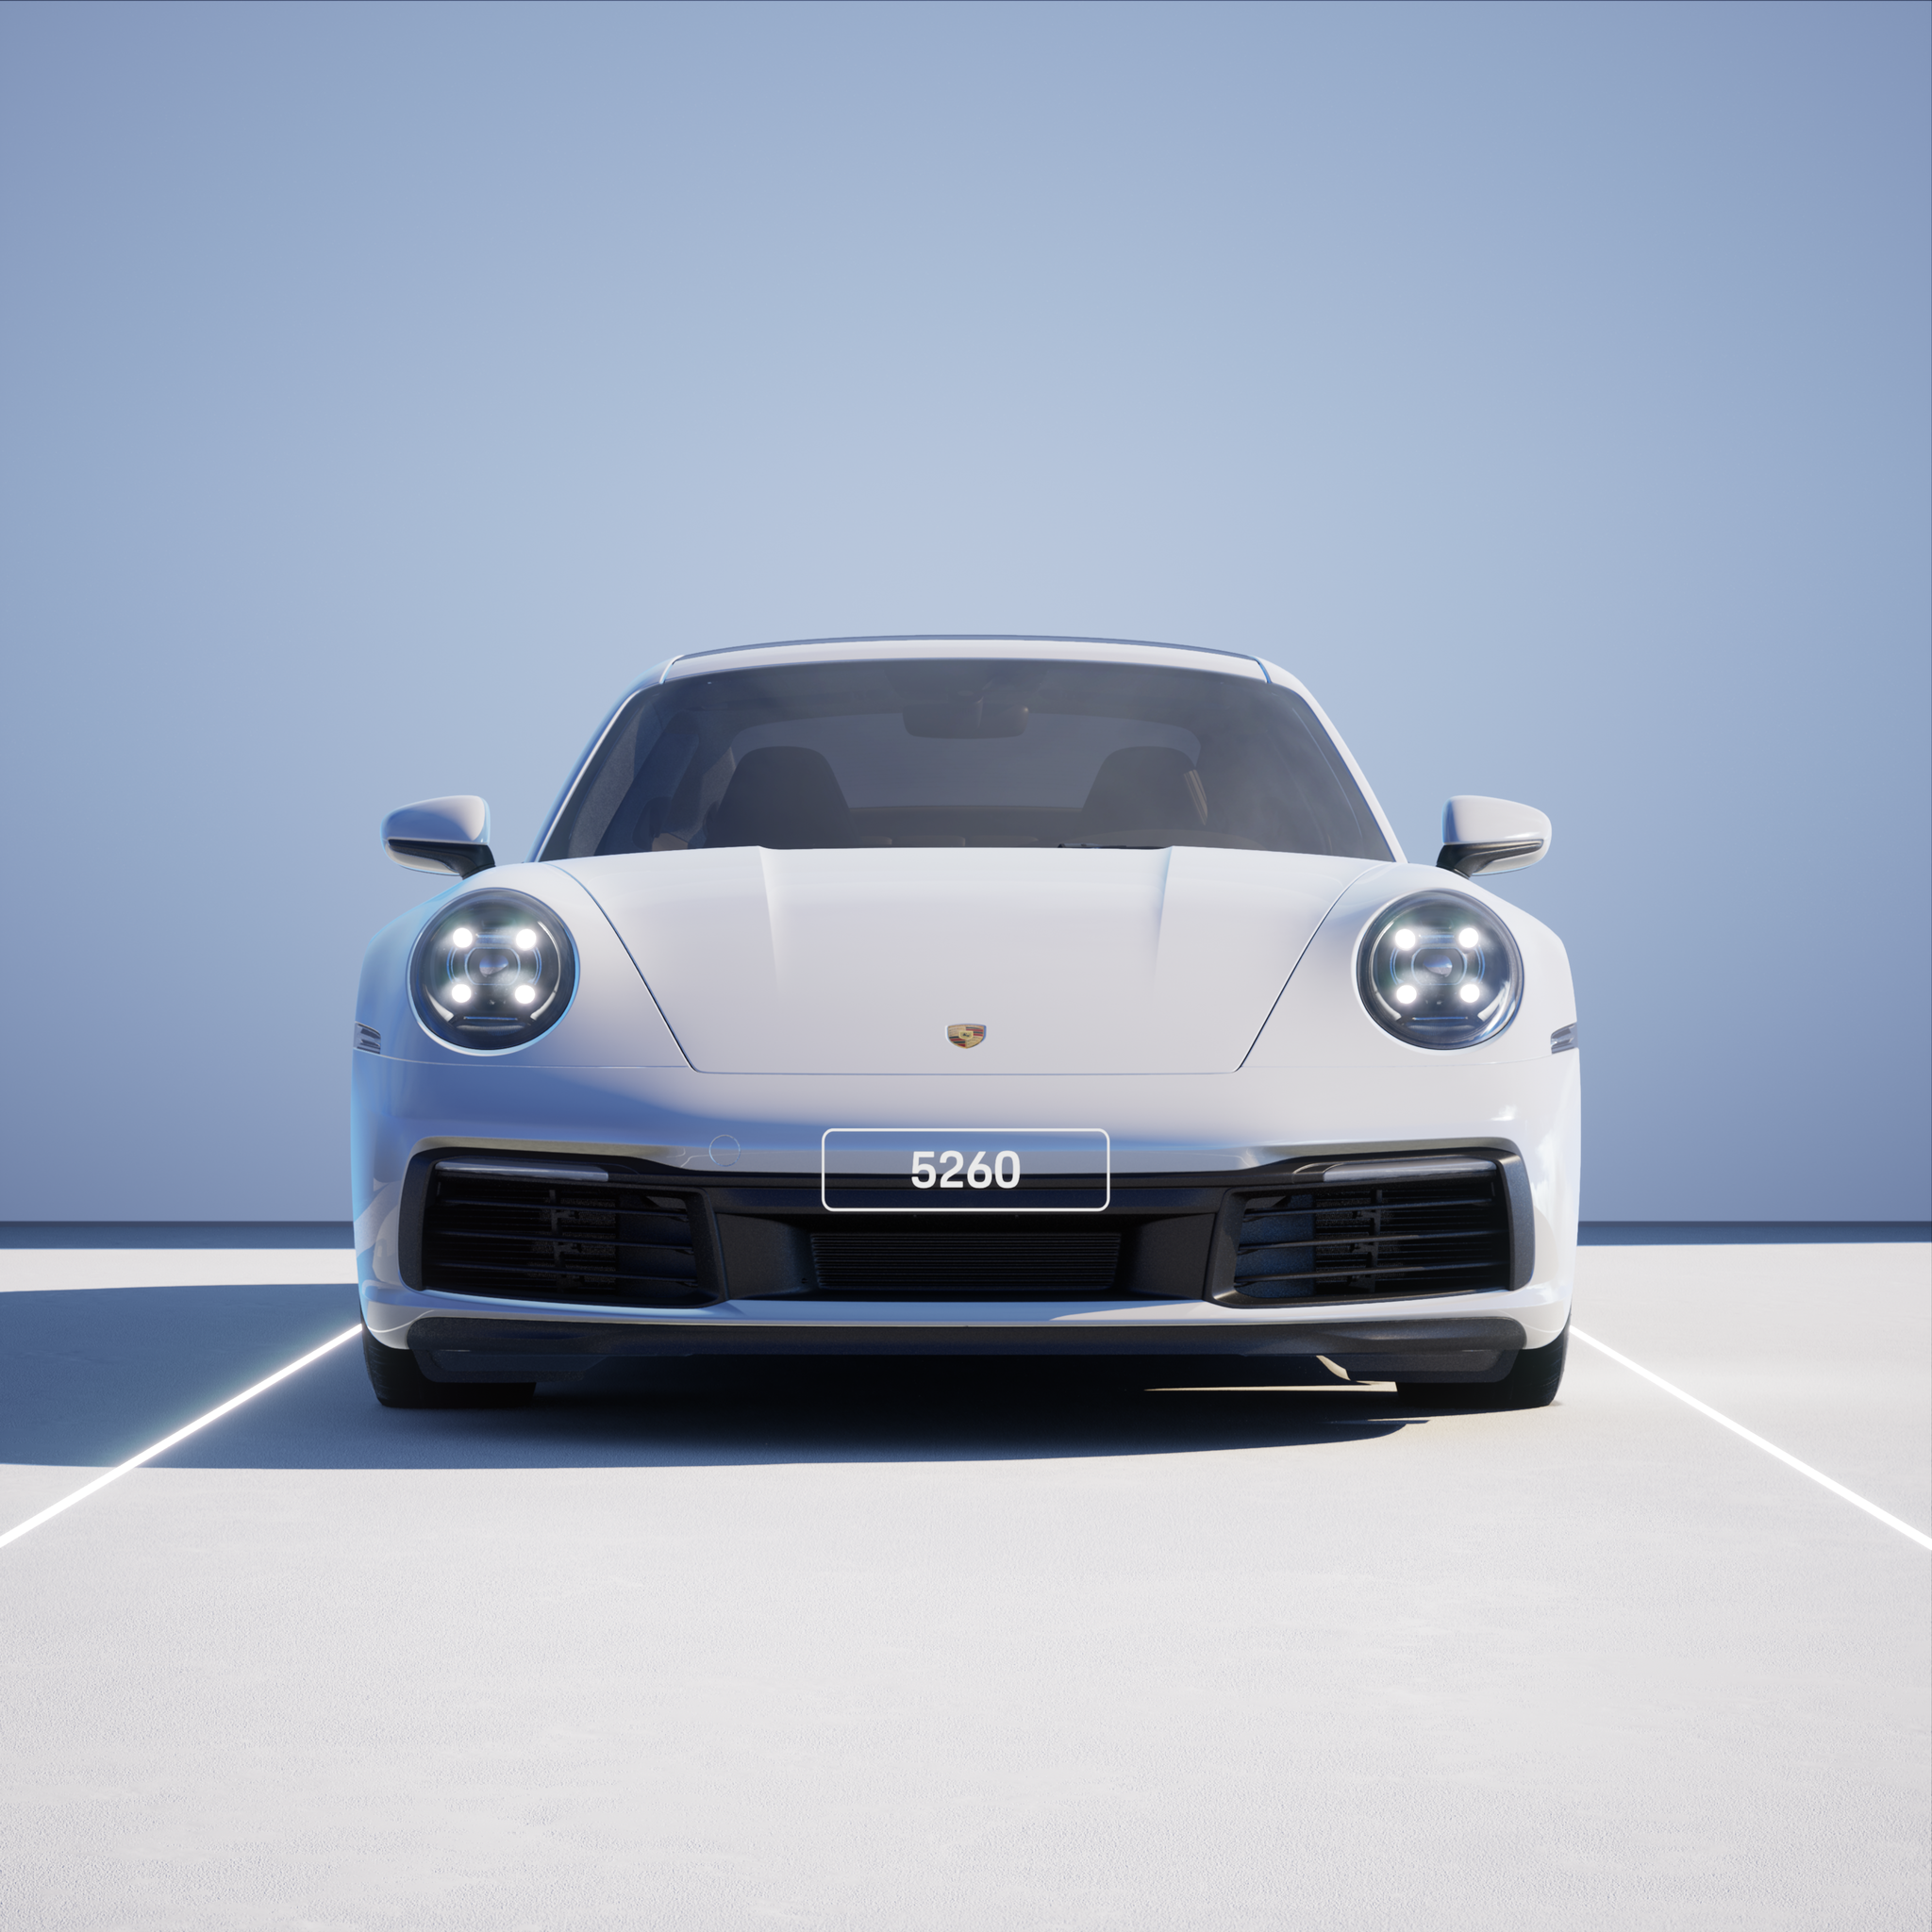 The PORSCHΞ 911 5260 image in phase